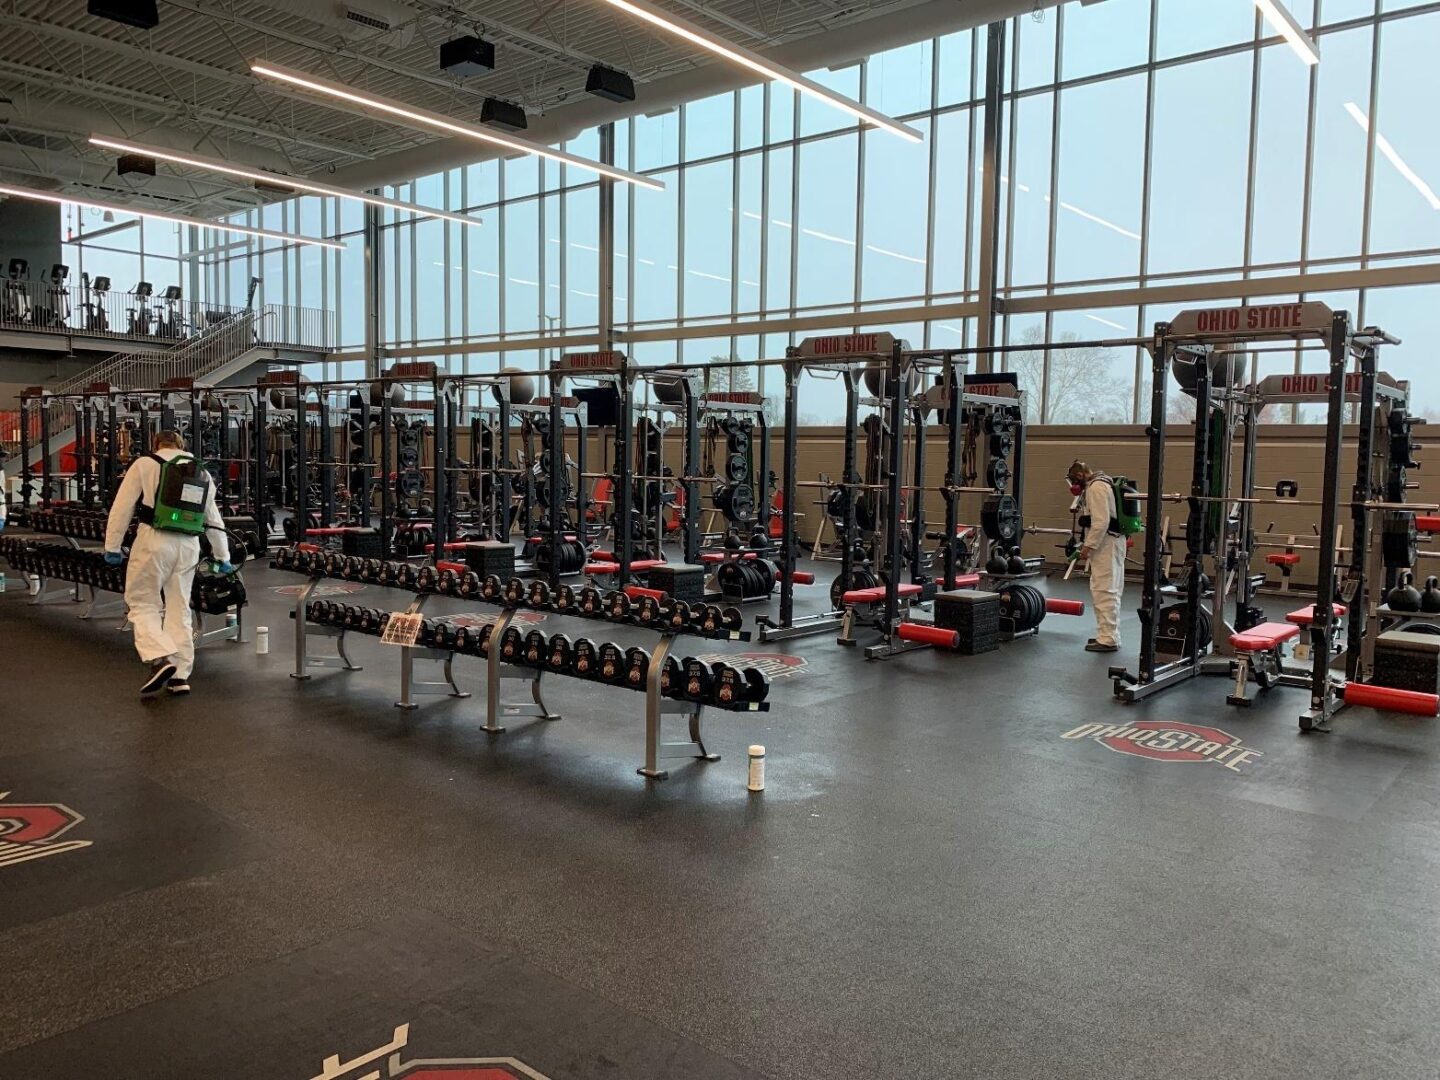 A gym with a lot of equipment in it.